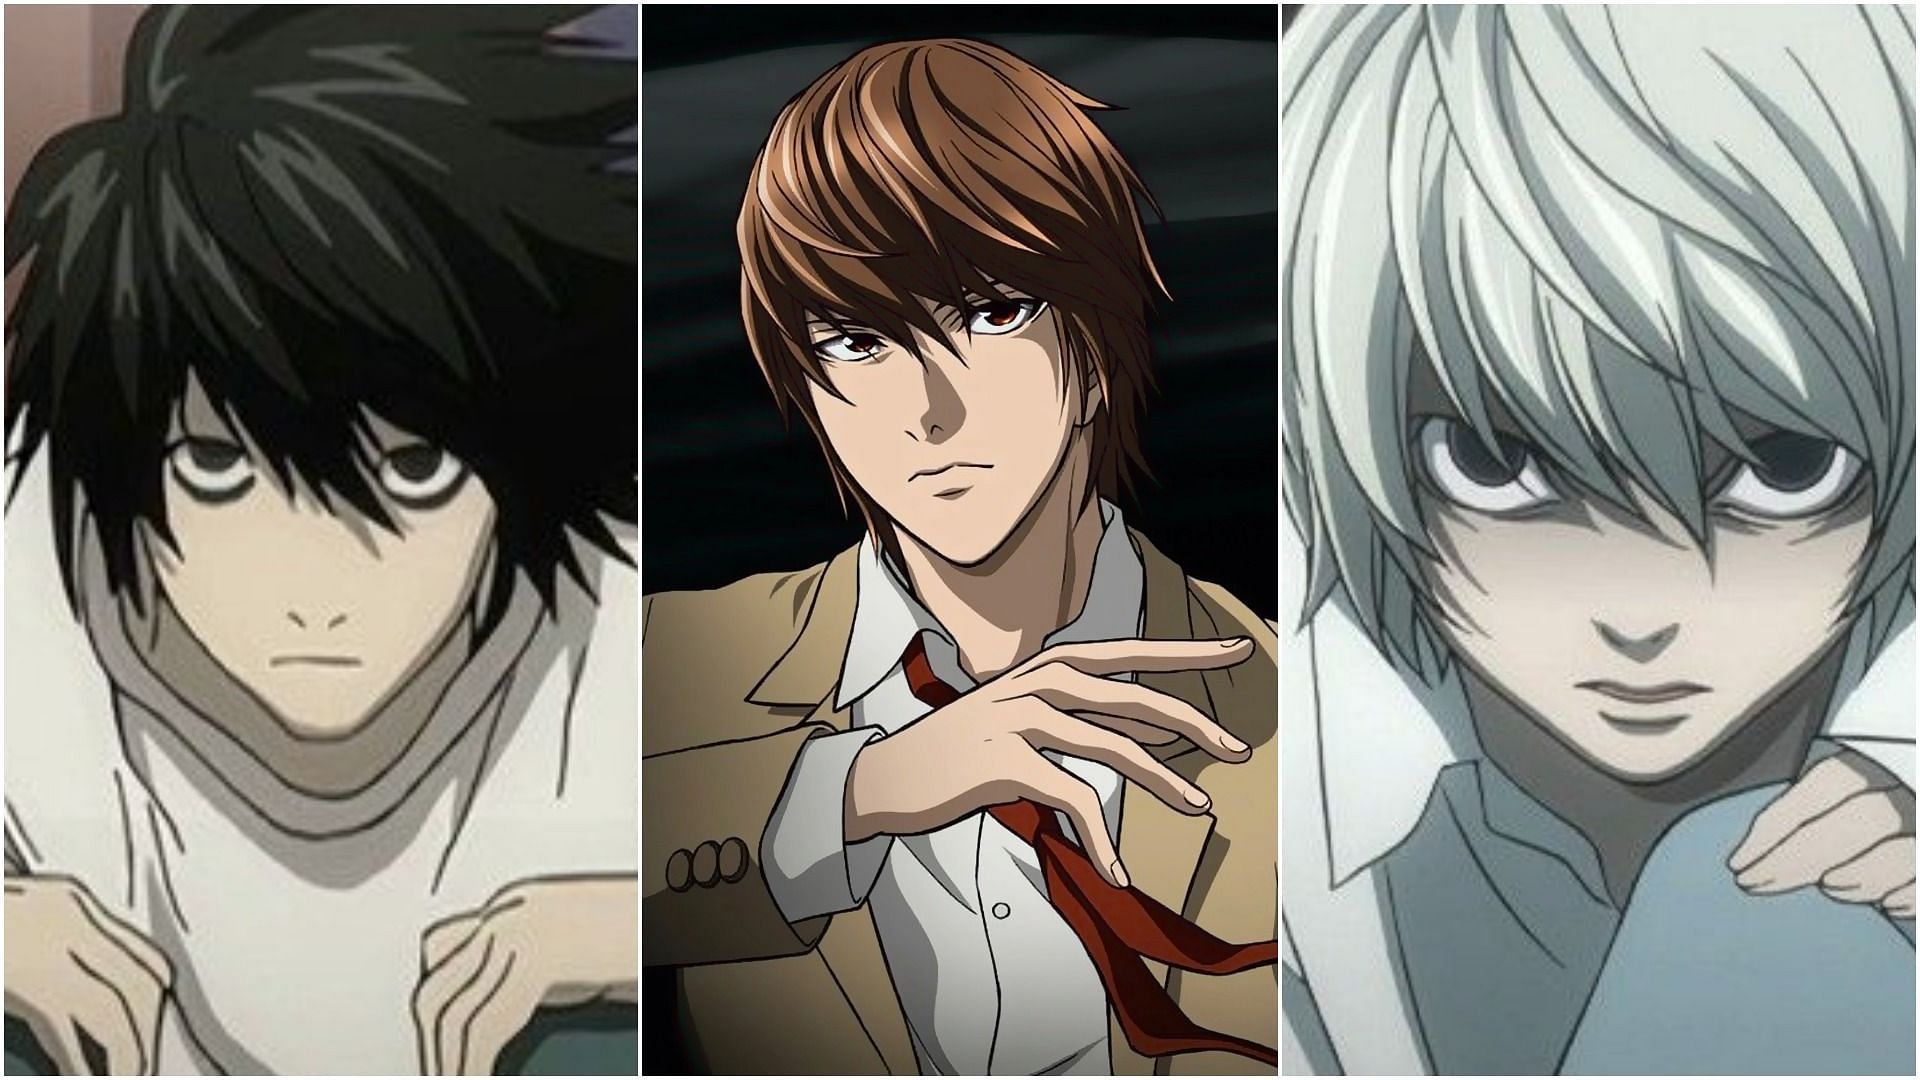 10 smartest characters in Death Note, ranked based on their intelligence